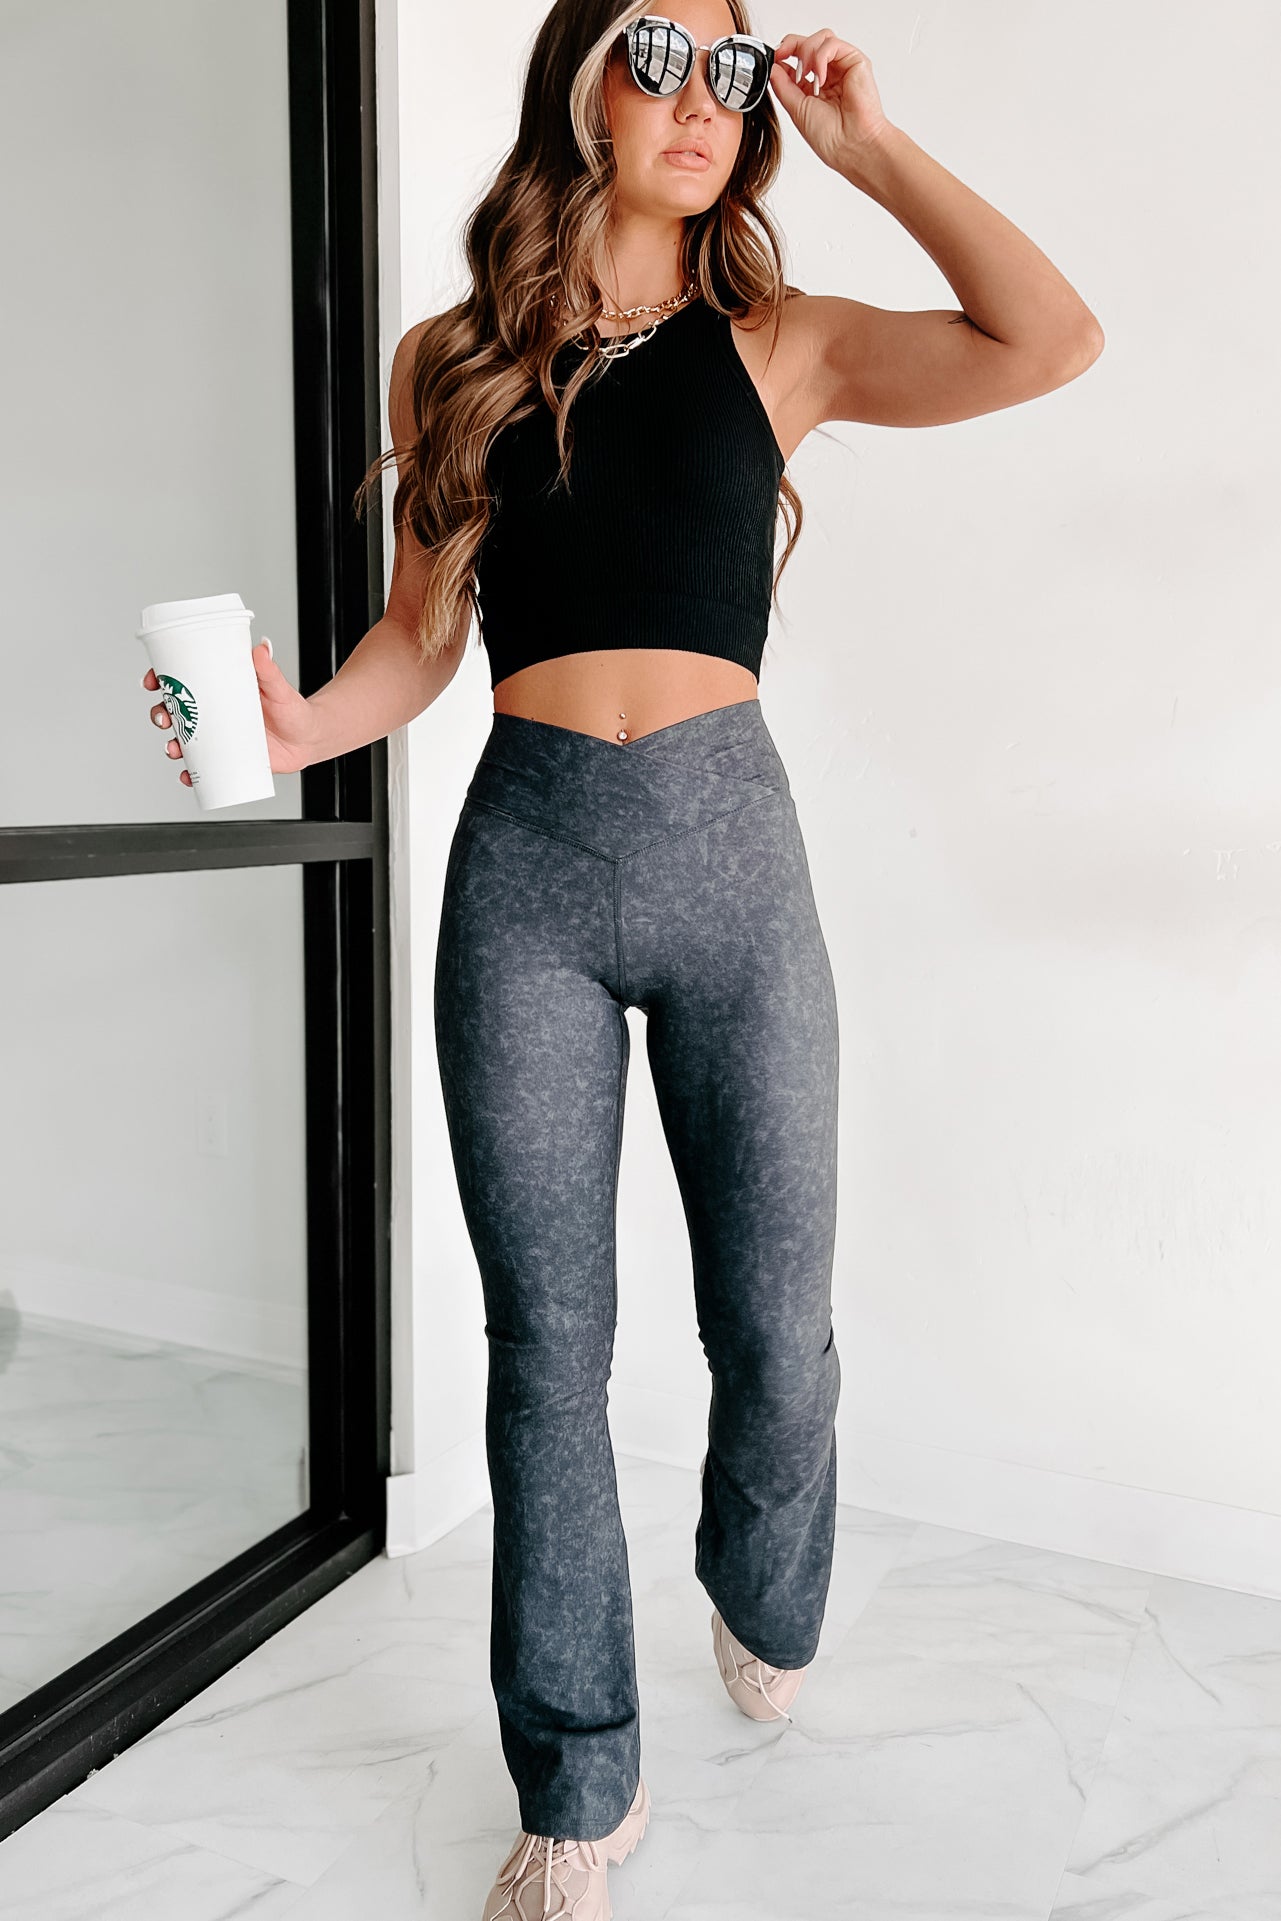 Impossible To Ignore Seamless Mineral Washed Leggings (Black) · NanaMacs